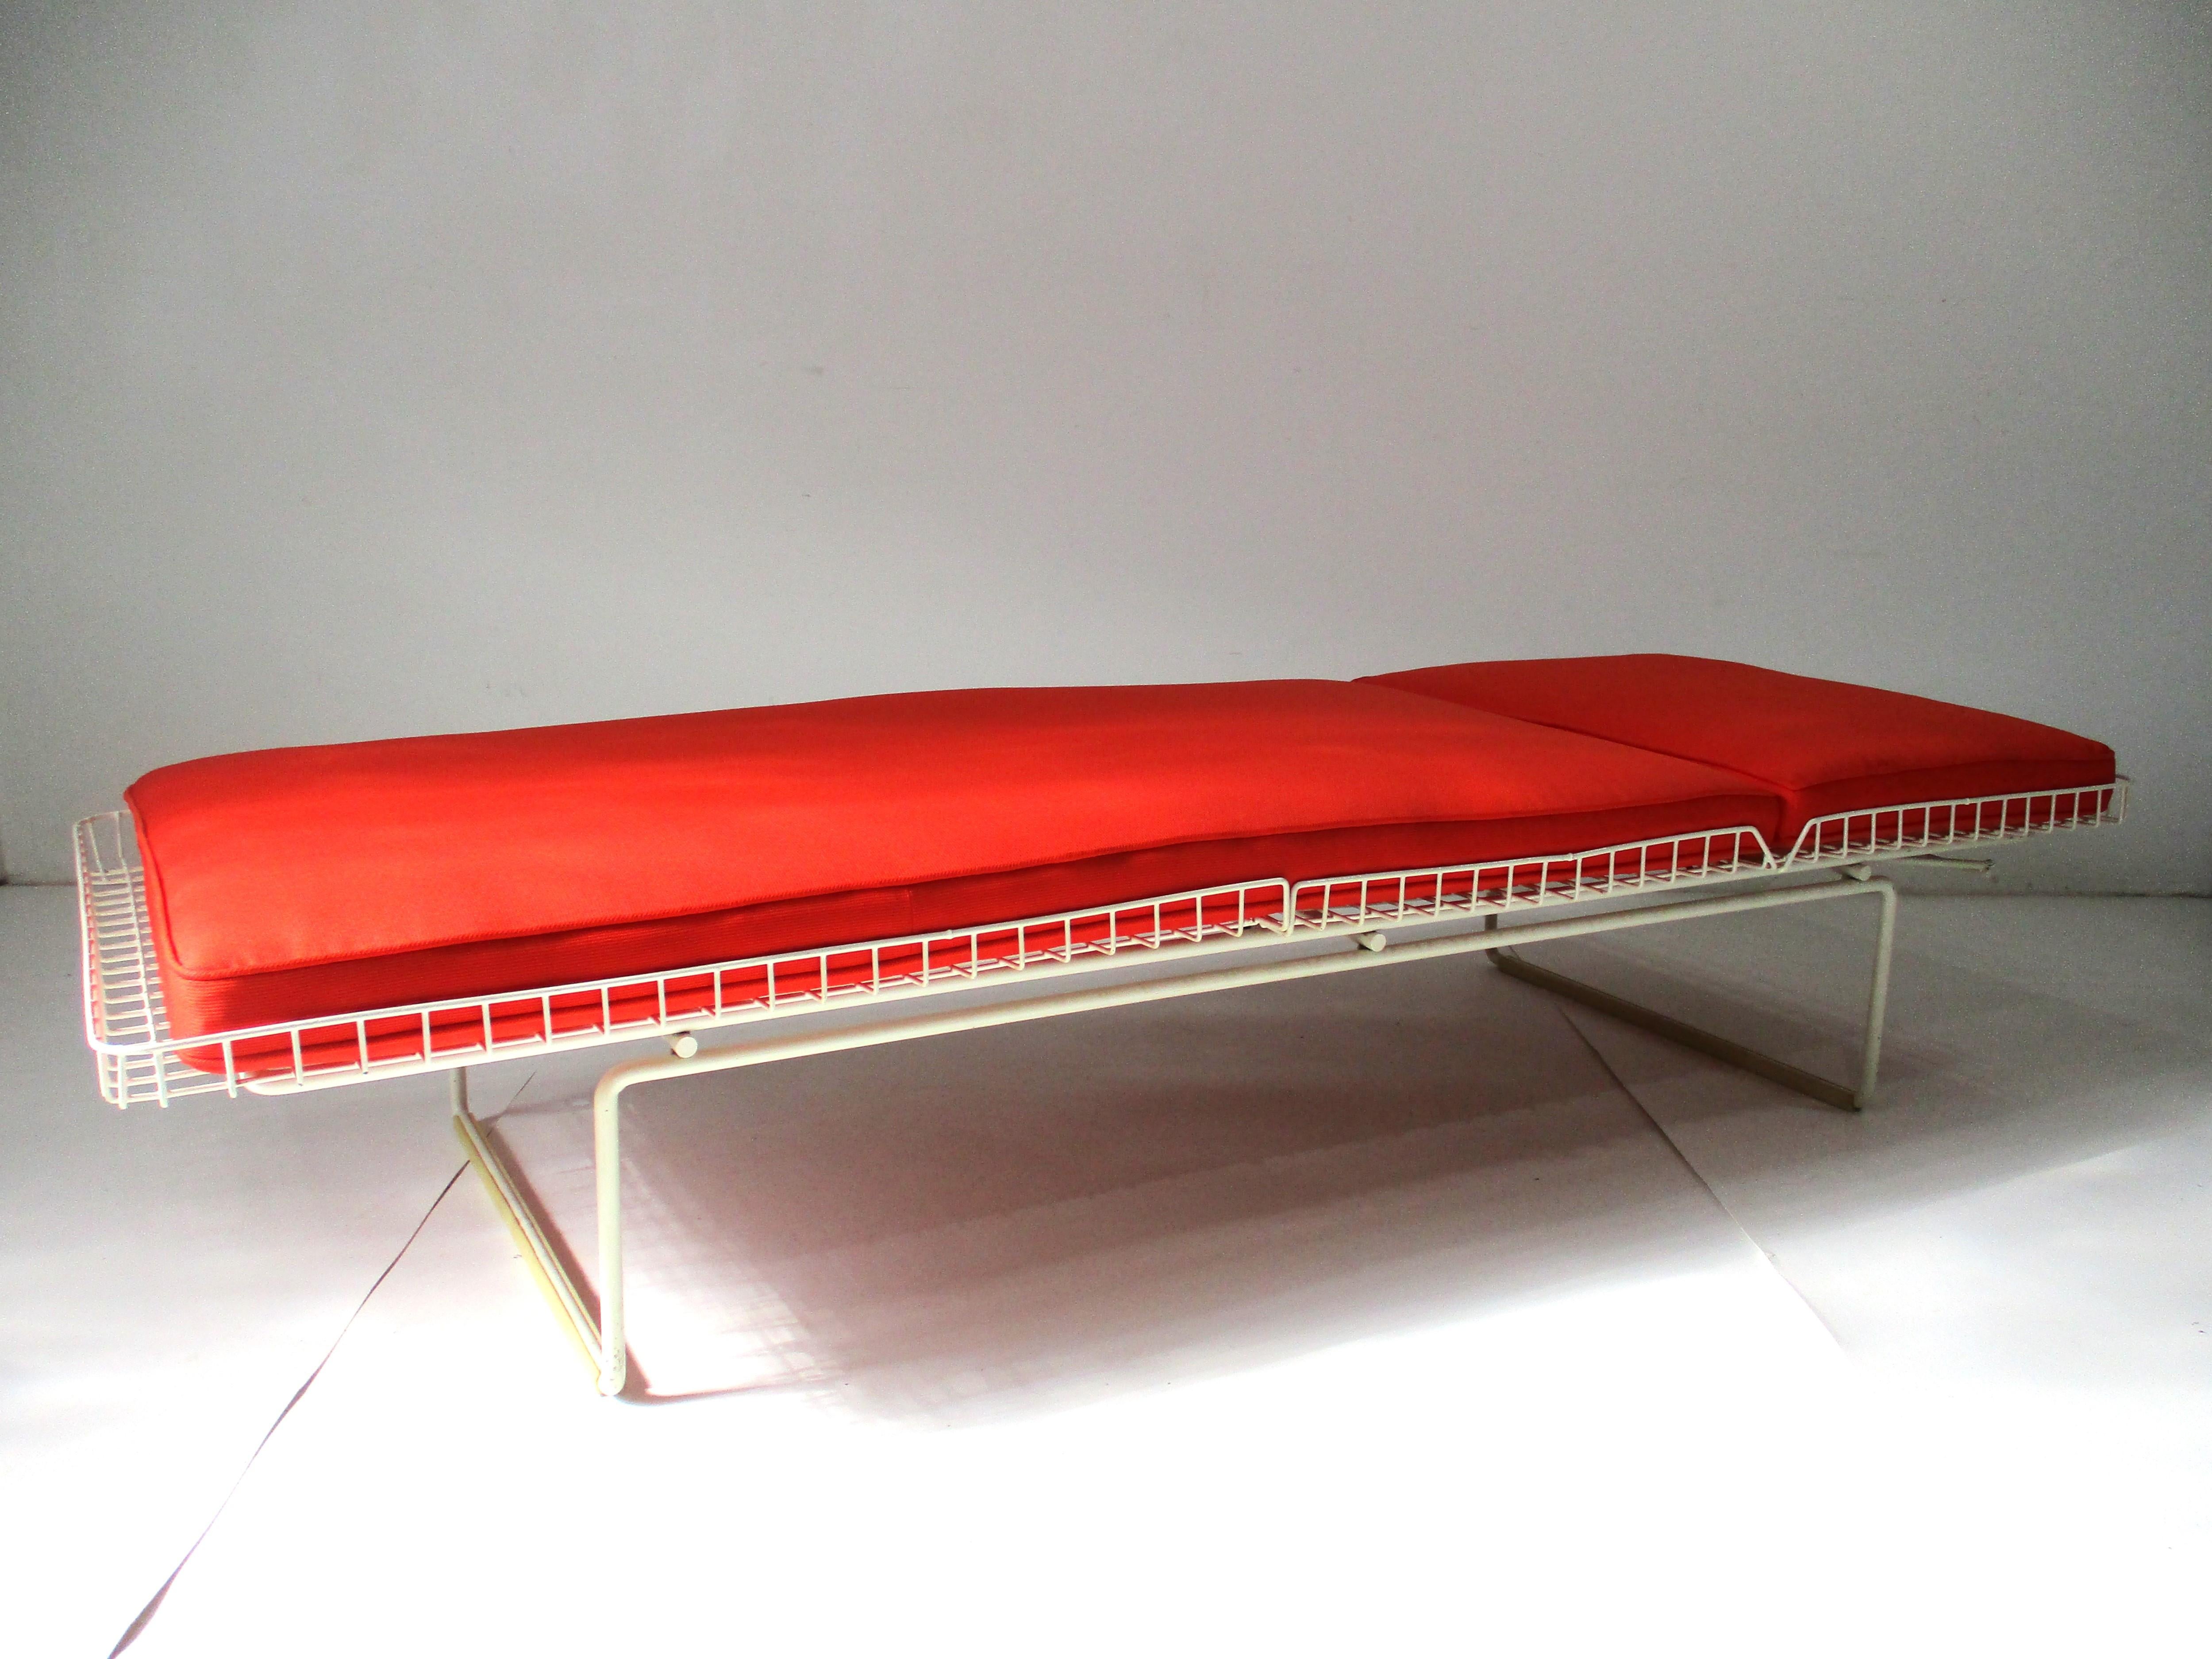 A white plastic coated wire chaise lounge with adjustable backrest and orange Knoll fabric two piece cushion . This rare chaise was produced for in door use since unlike the outdoor version does not have wheels . The piece has the original plastic